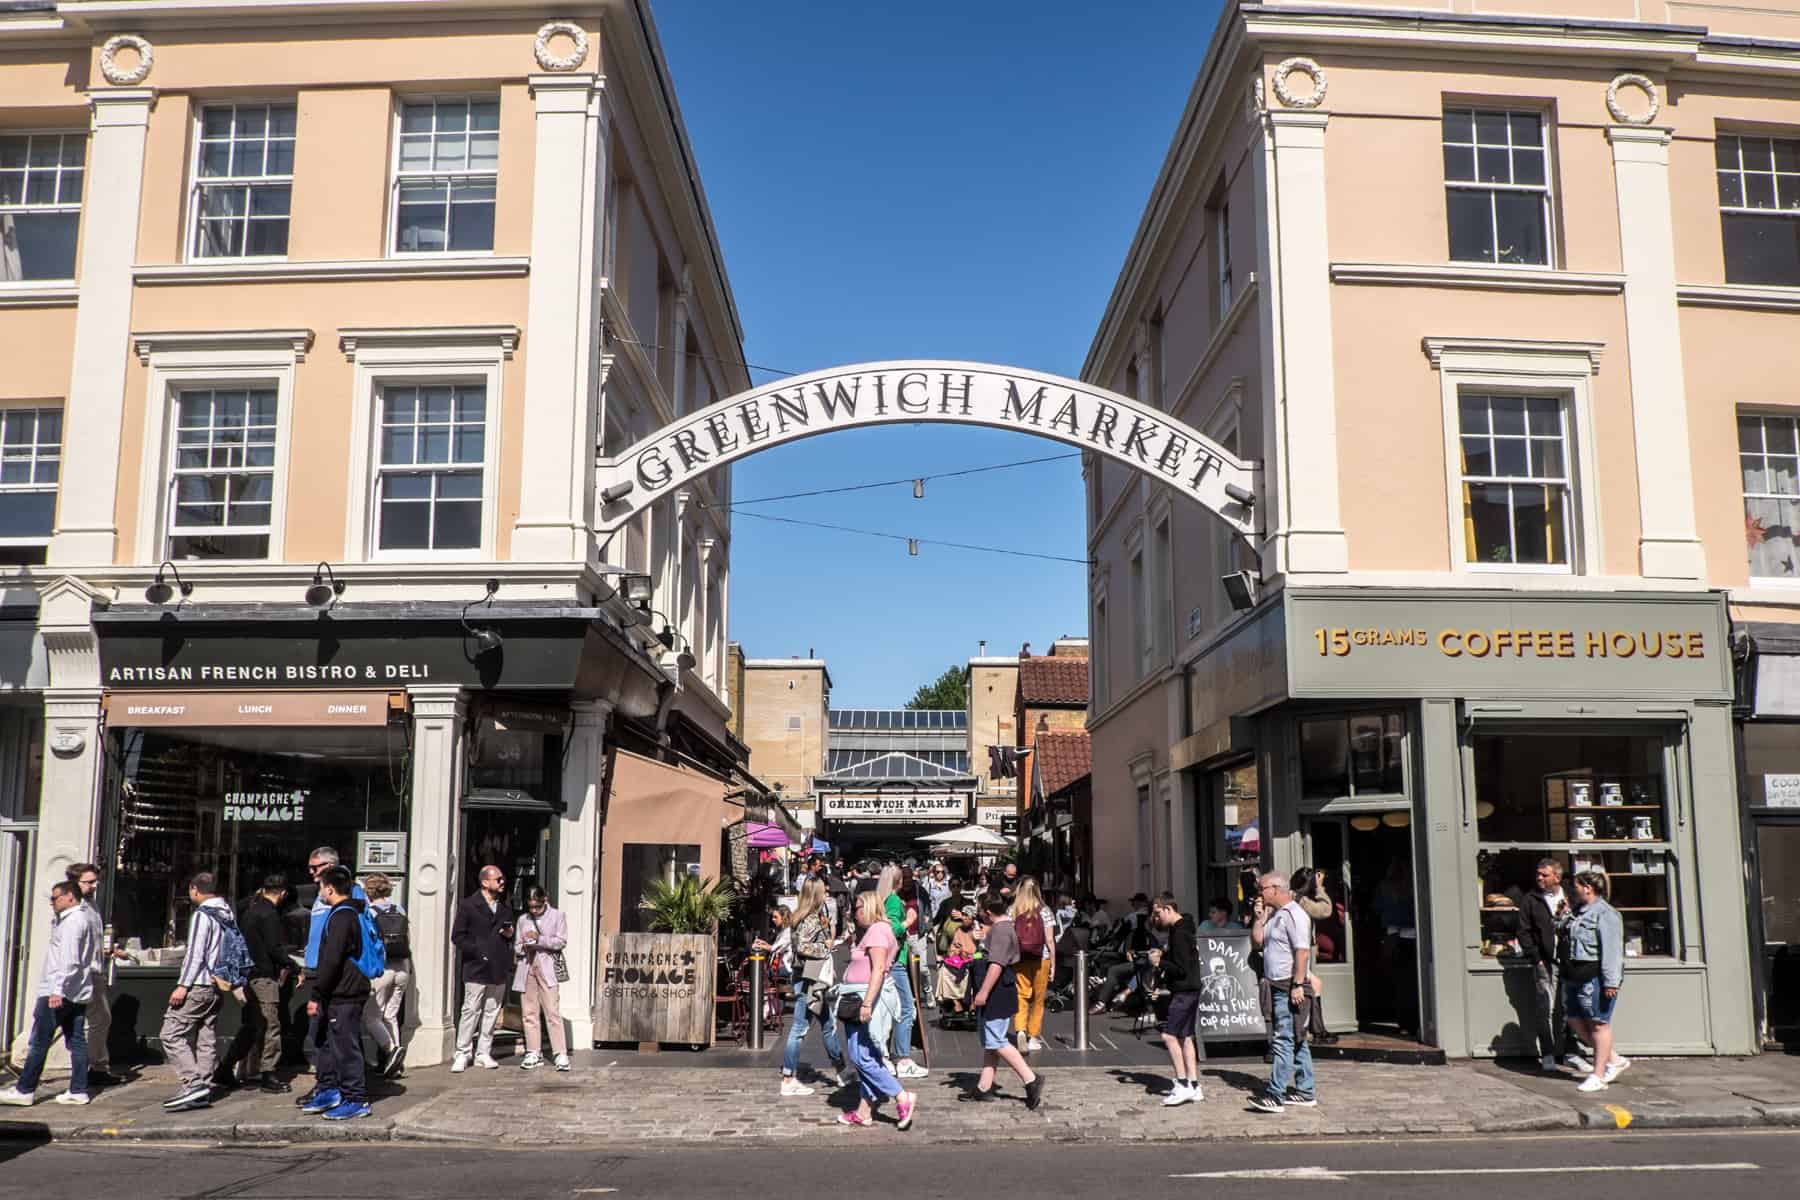 Crowds walk along the street outside the curved Greenwich Market sign and entrance. A Artisan French Bistro and 15 Grams Coffee House can be seen on either side. 